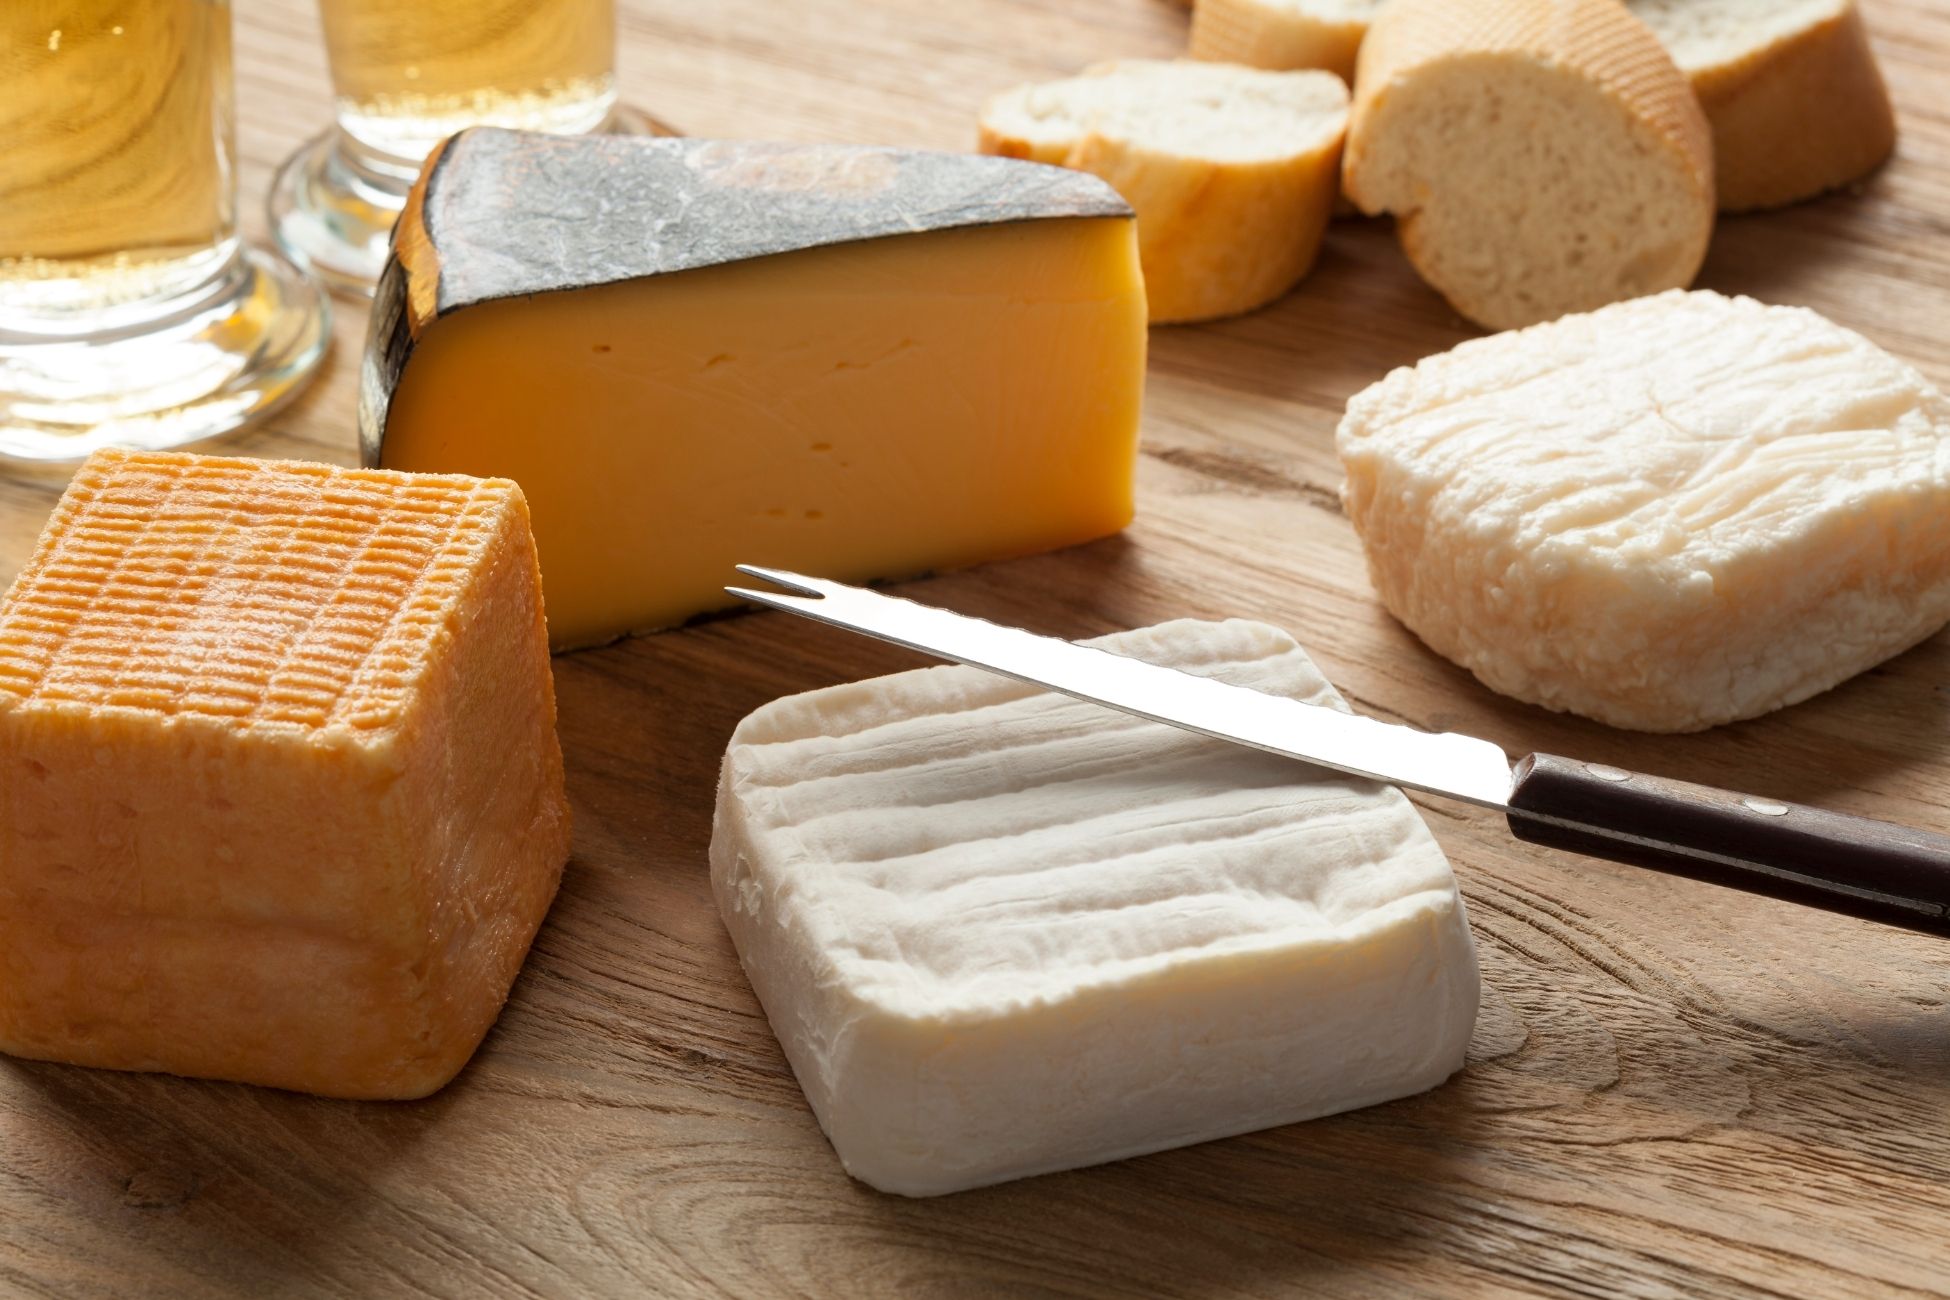 How to Prepare a Cheese Board